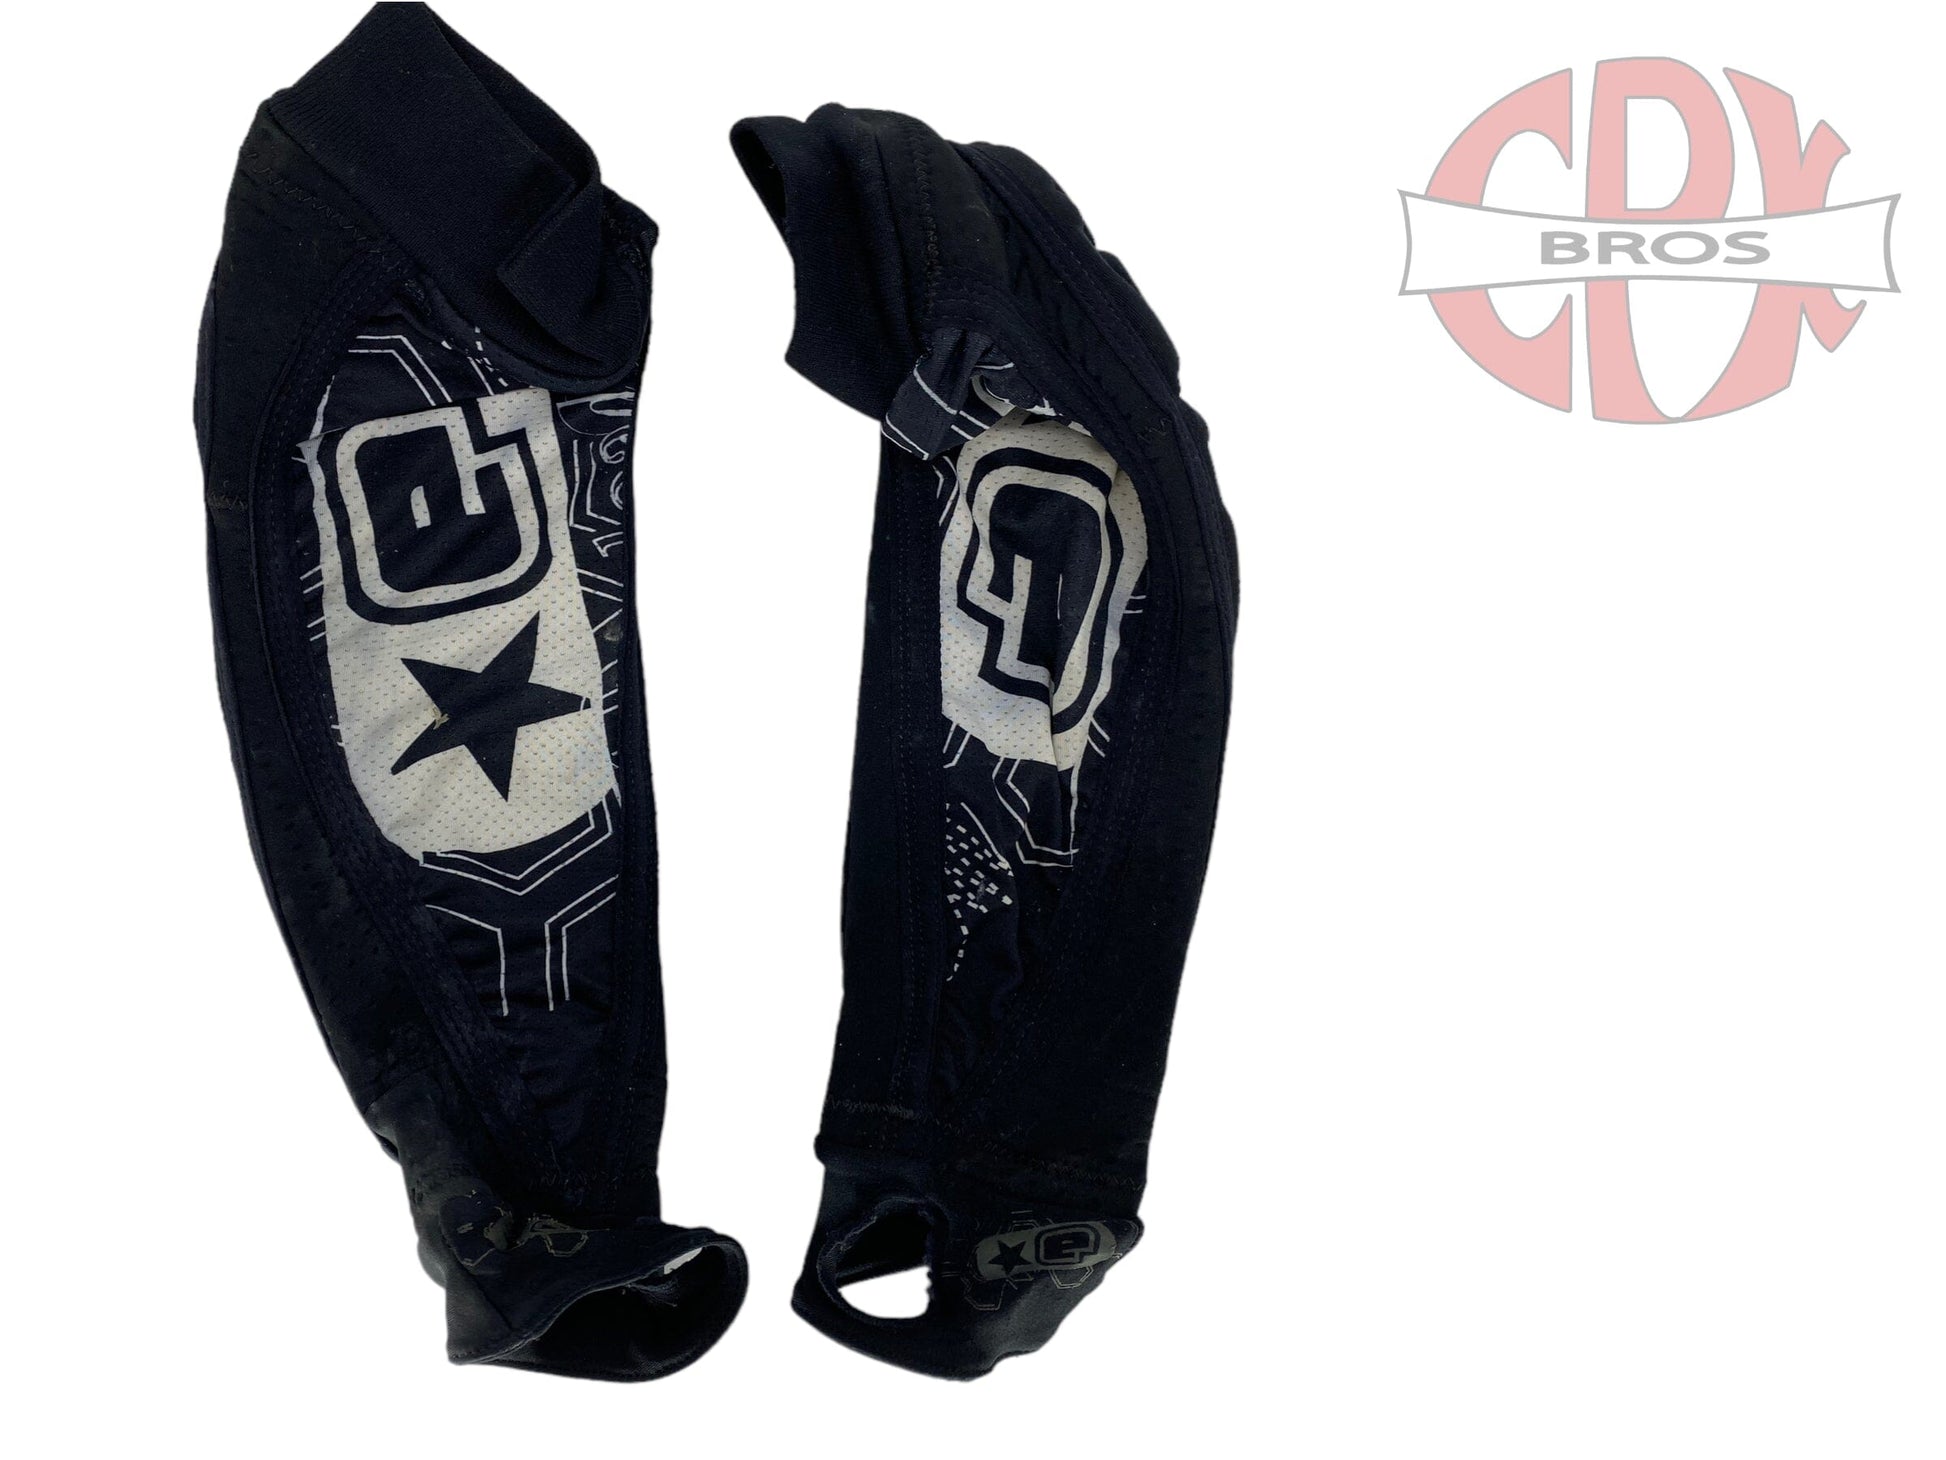 Used Planet Eclipse Overload Paintball Elbow Pads size Small/Medium Paintball Gun from CPXBrosPaintball Buy/Sell/Trade Paintball Markers, Paintball Hoppers, Paintball Masks, and Hormesis Headbands